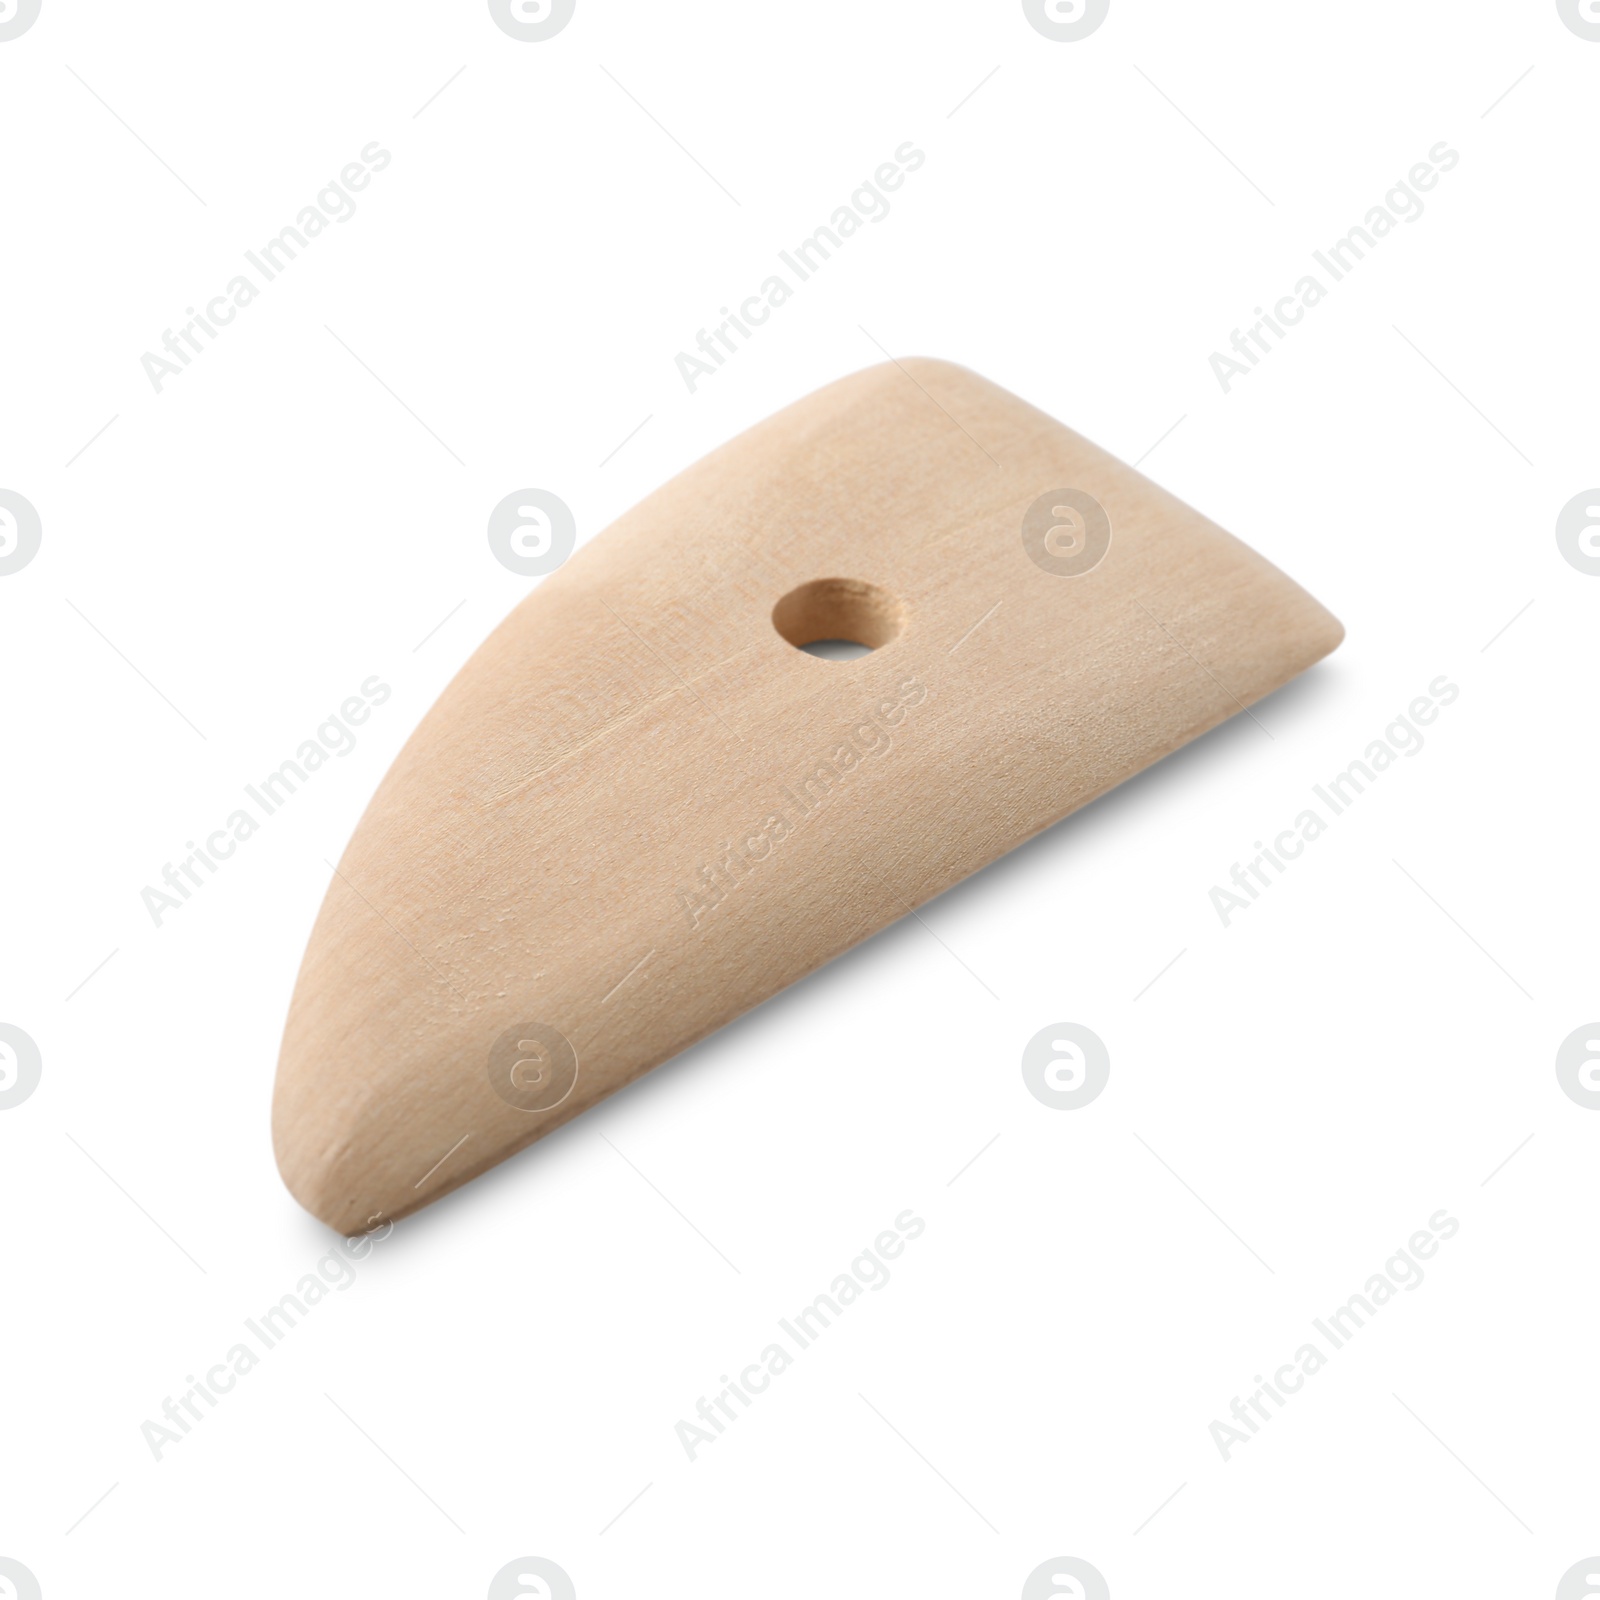 Photo of Wooden rib for clay modeling isolated on white